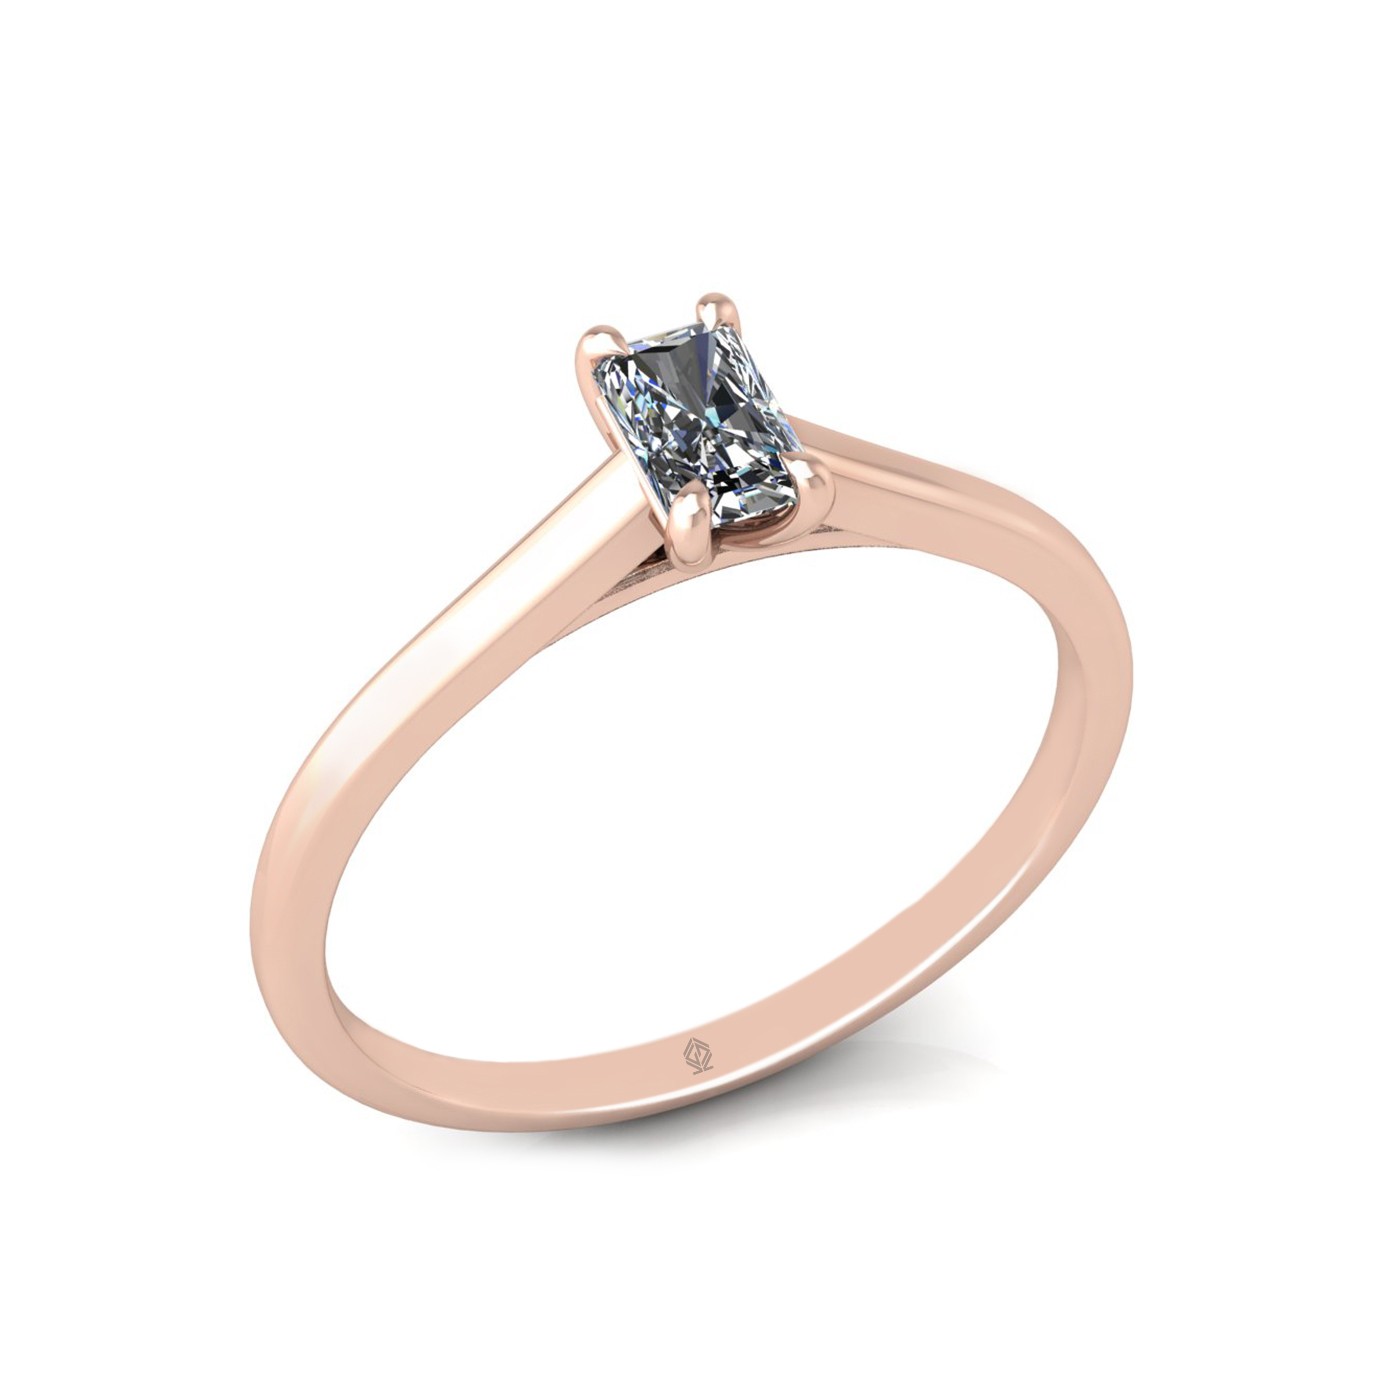 18k rose gold  0,30 ct 4 prongs solitaire radiant cut diamond engagement ring with whisper thin band